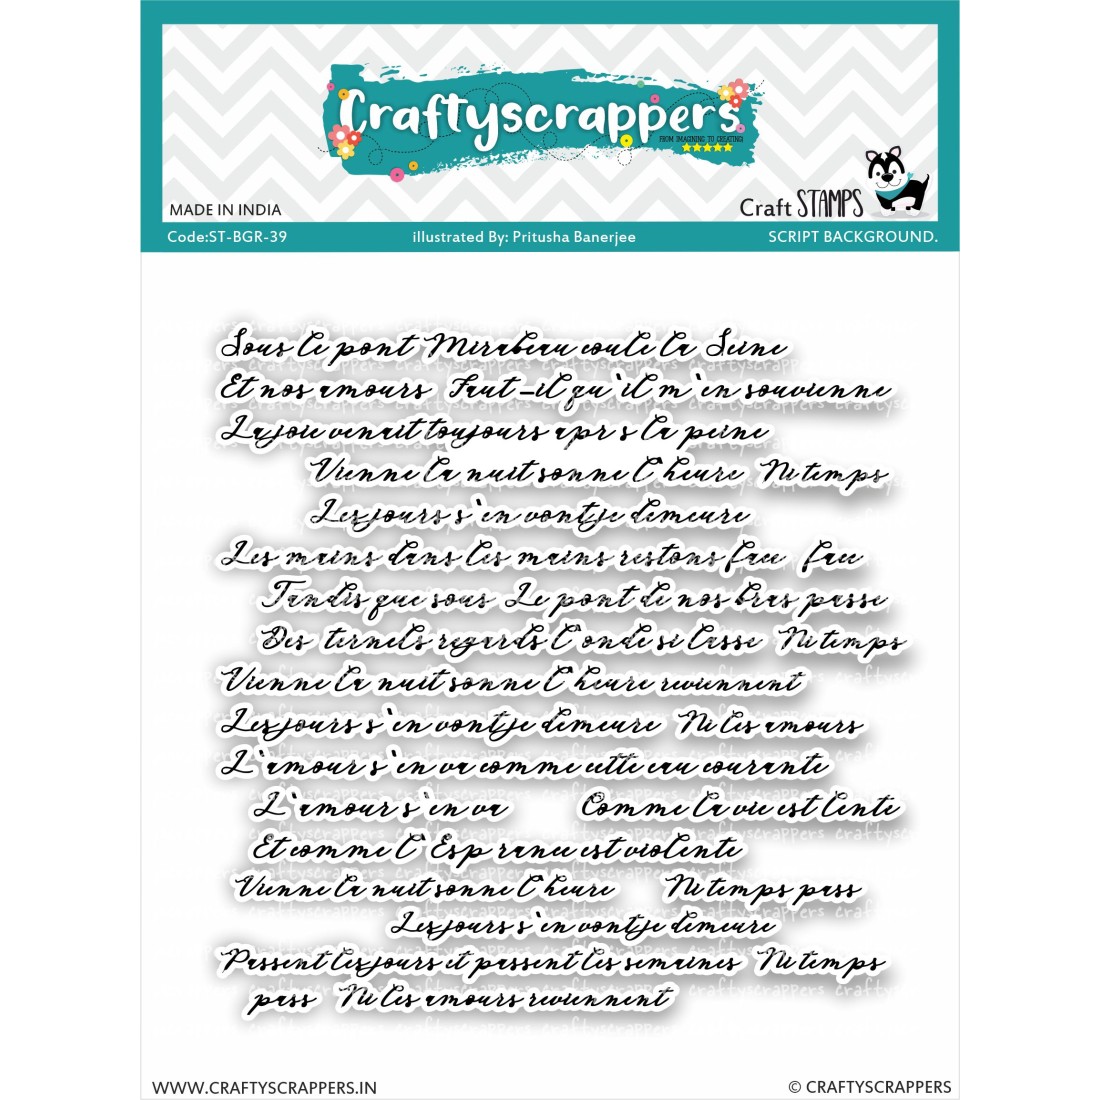 Craftyscrappers Stamps- SCRIPT BACKGROUND